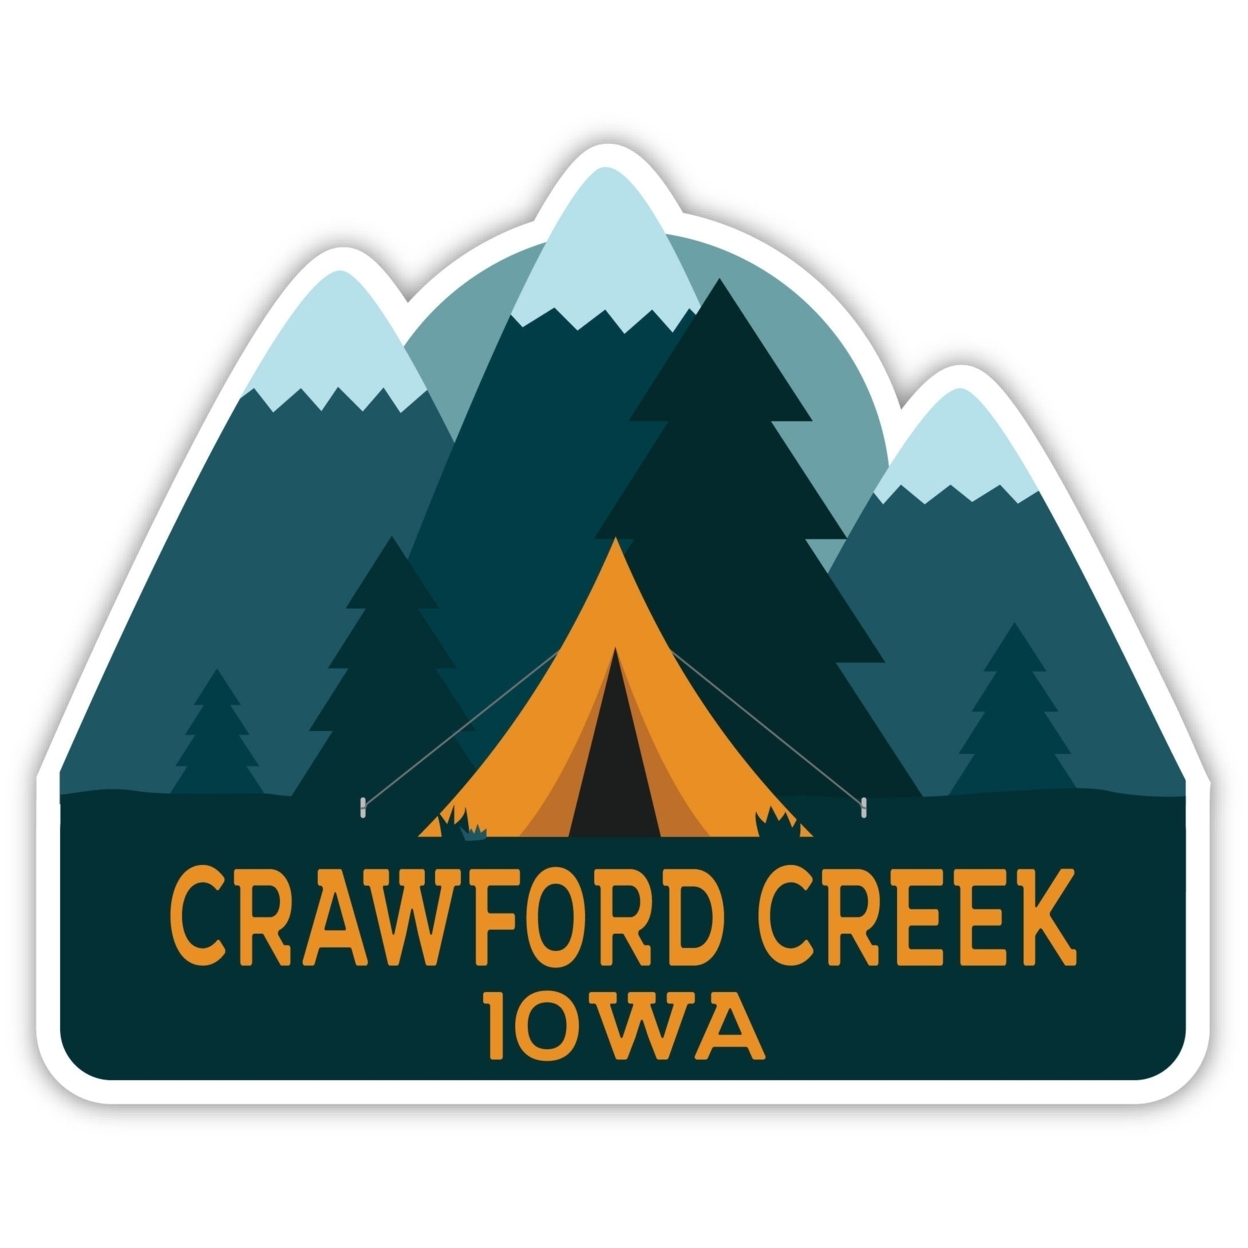 Crawford Creek Iowa Souvenir Decorative Stickers (Choose Theme And Size) - 4-Pack, 4-Inch, Tent